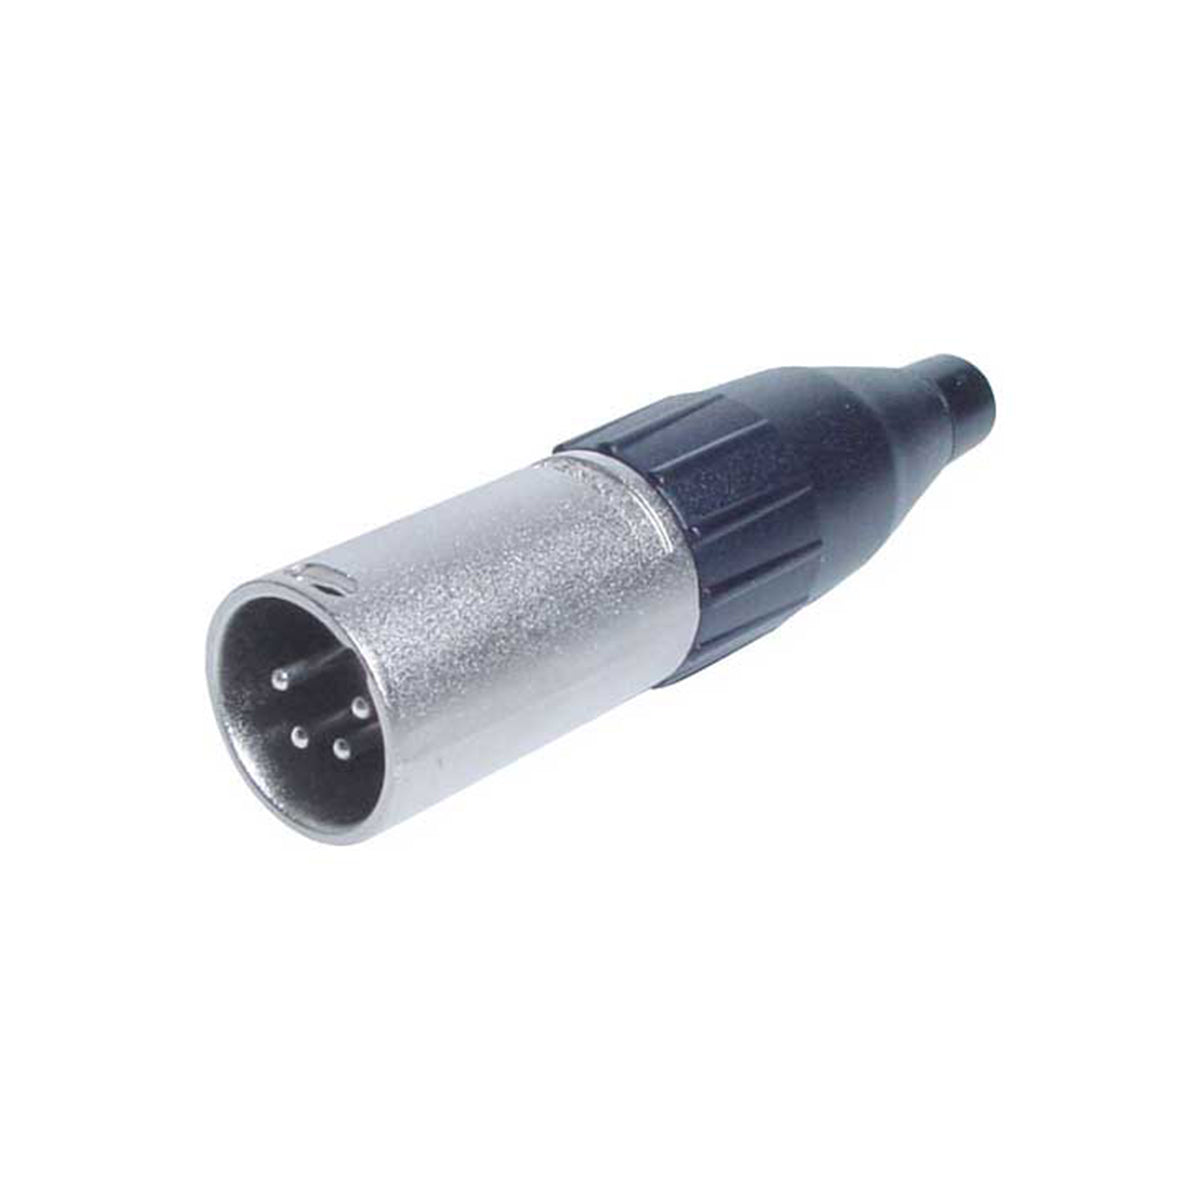 Amphenol Male XLR 4 Inline Machined contacts Nickel finish